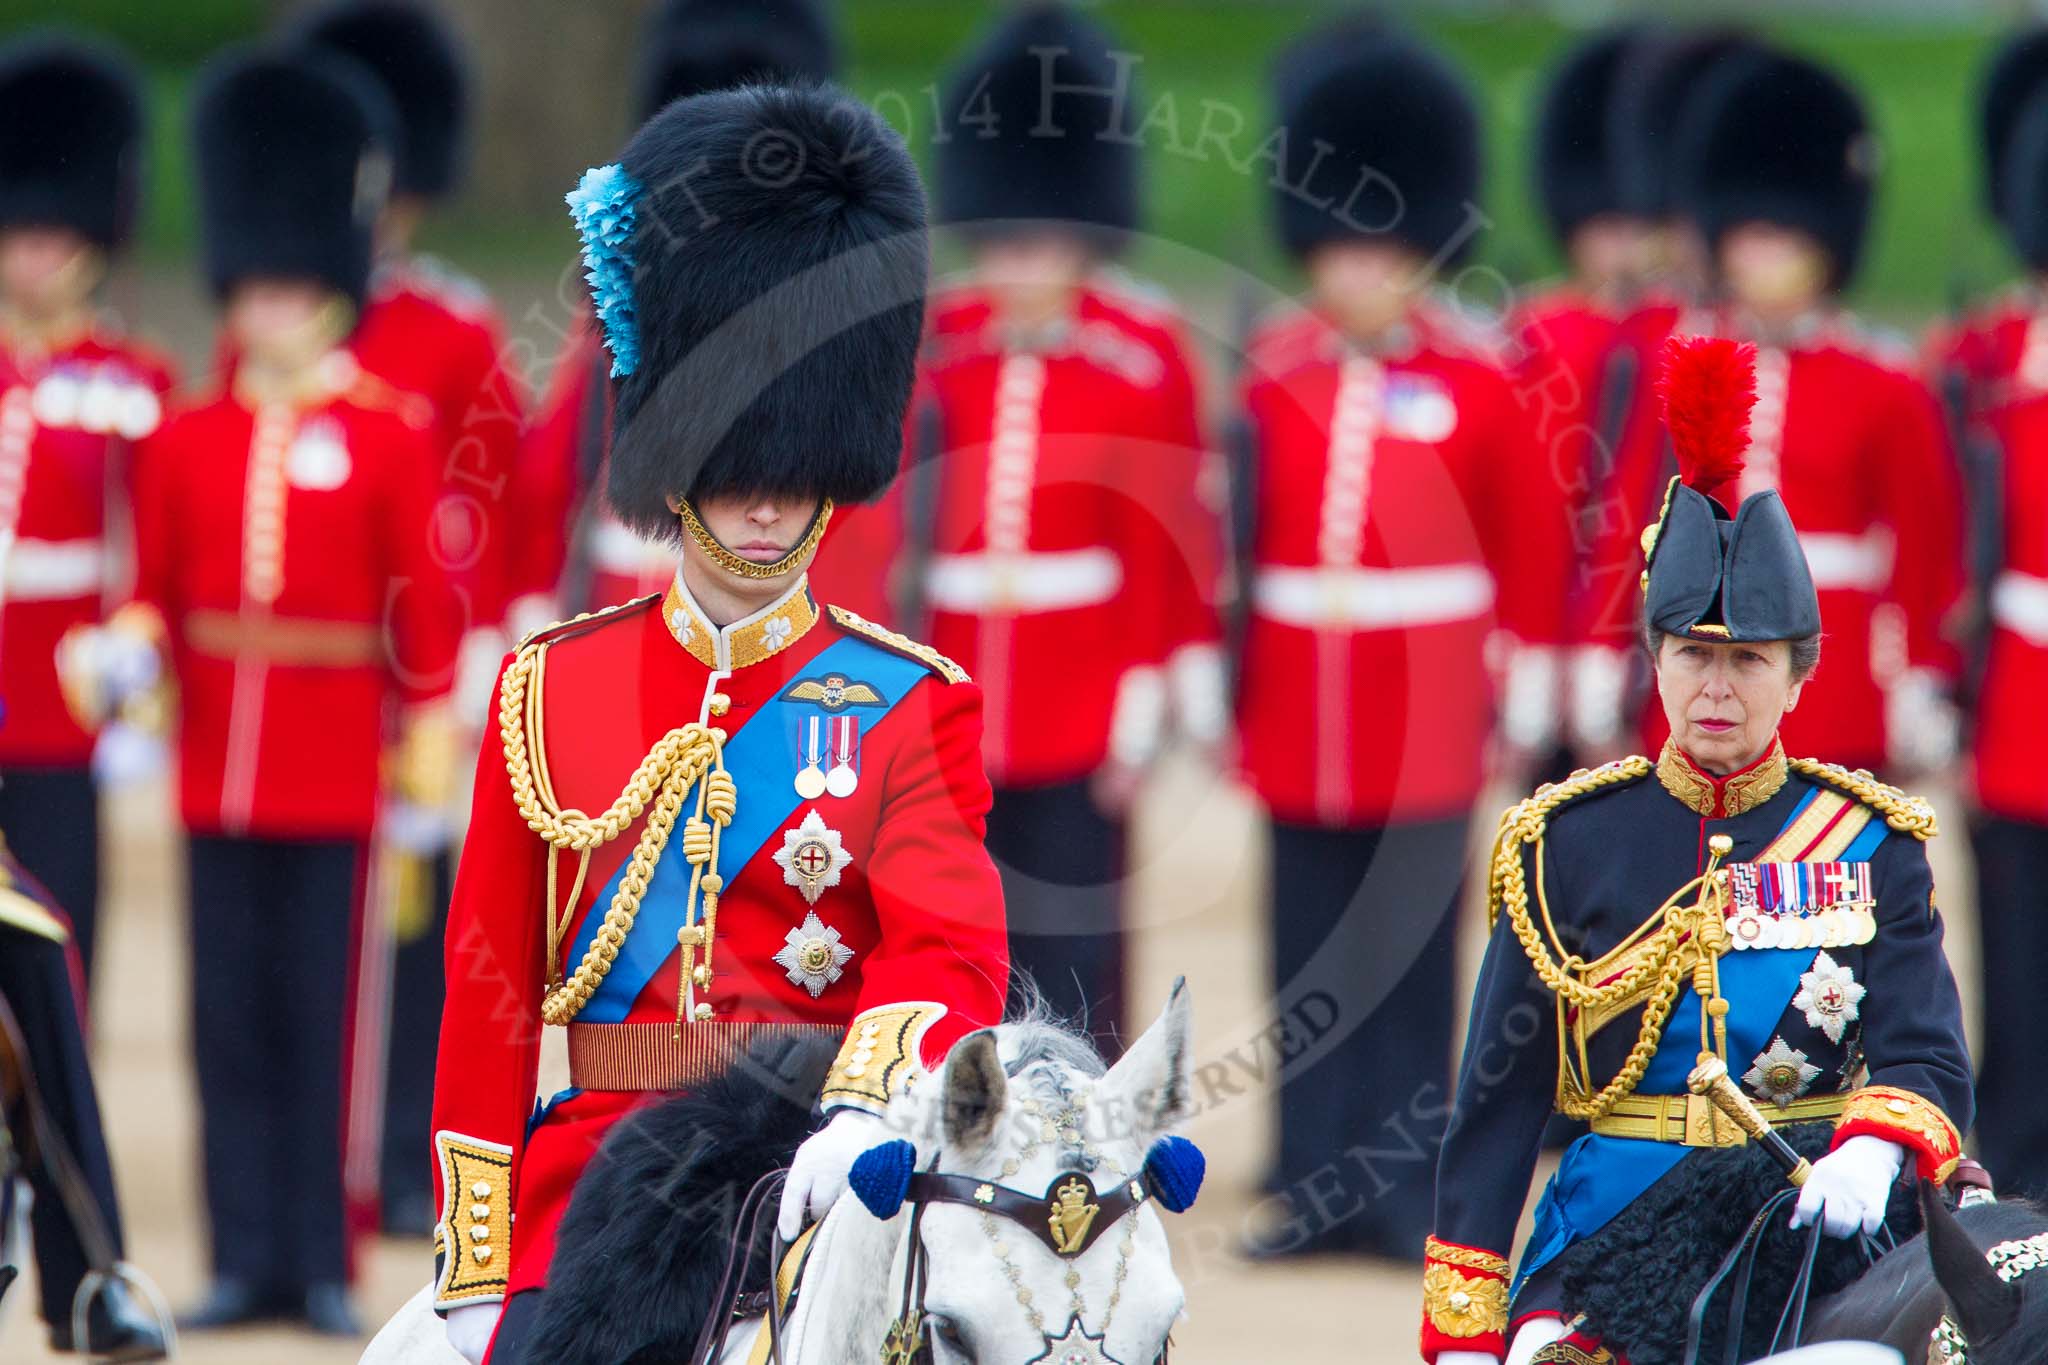 Trooping the Colour 2014.
Horse Guards Parade, Westminster,
London SW1A,

United Kingdom,
on 14 June 2014 at 11:07, image #430